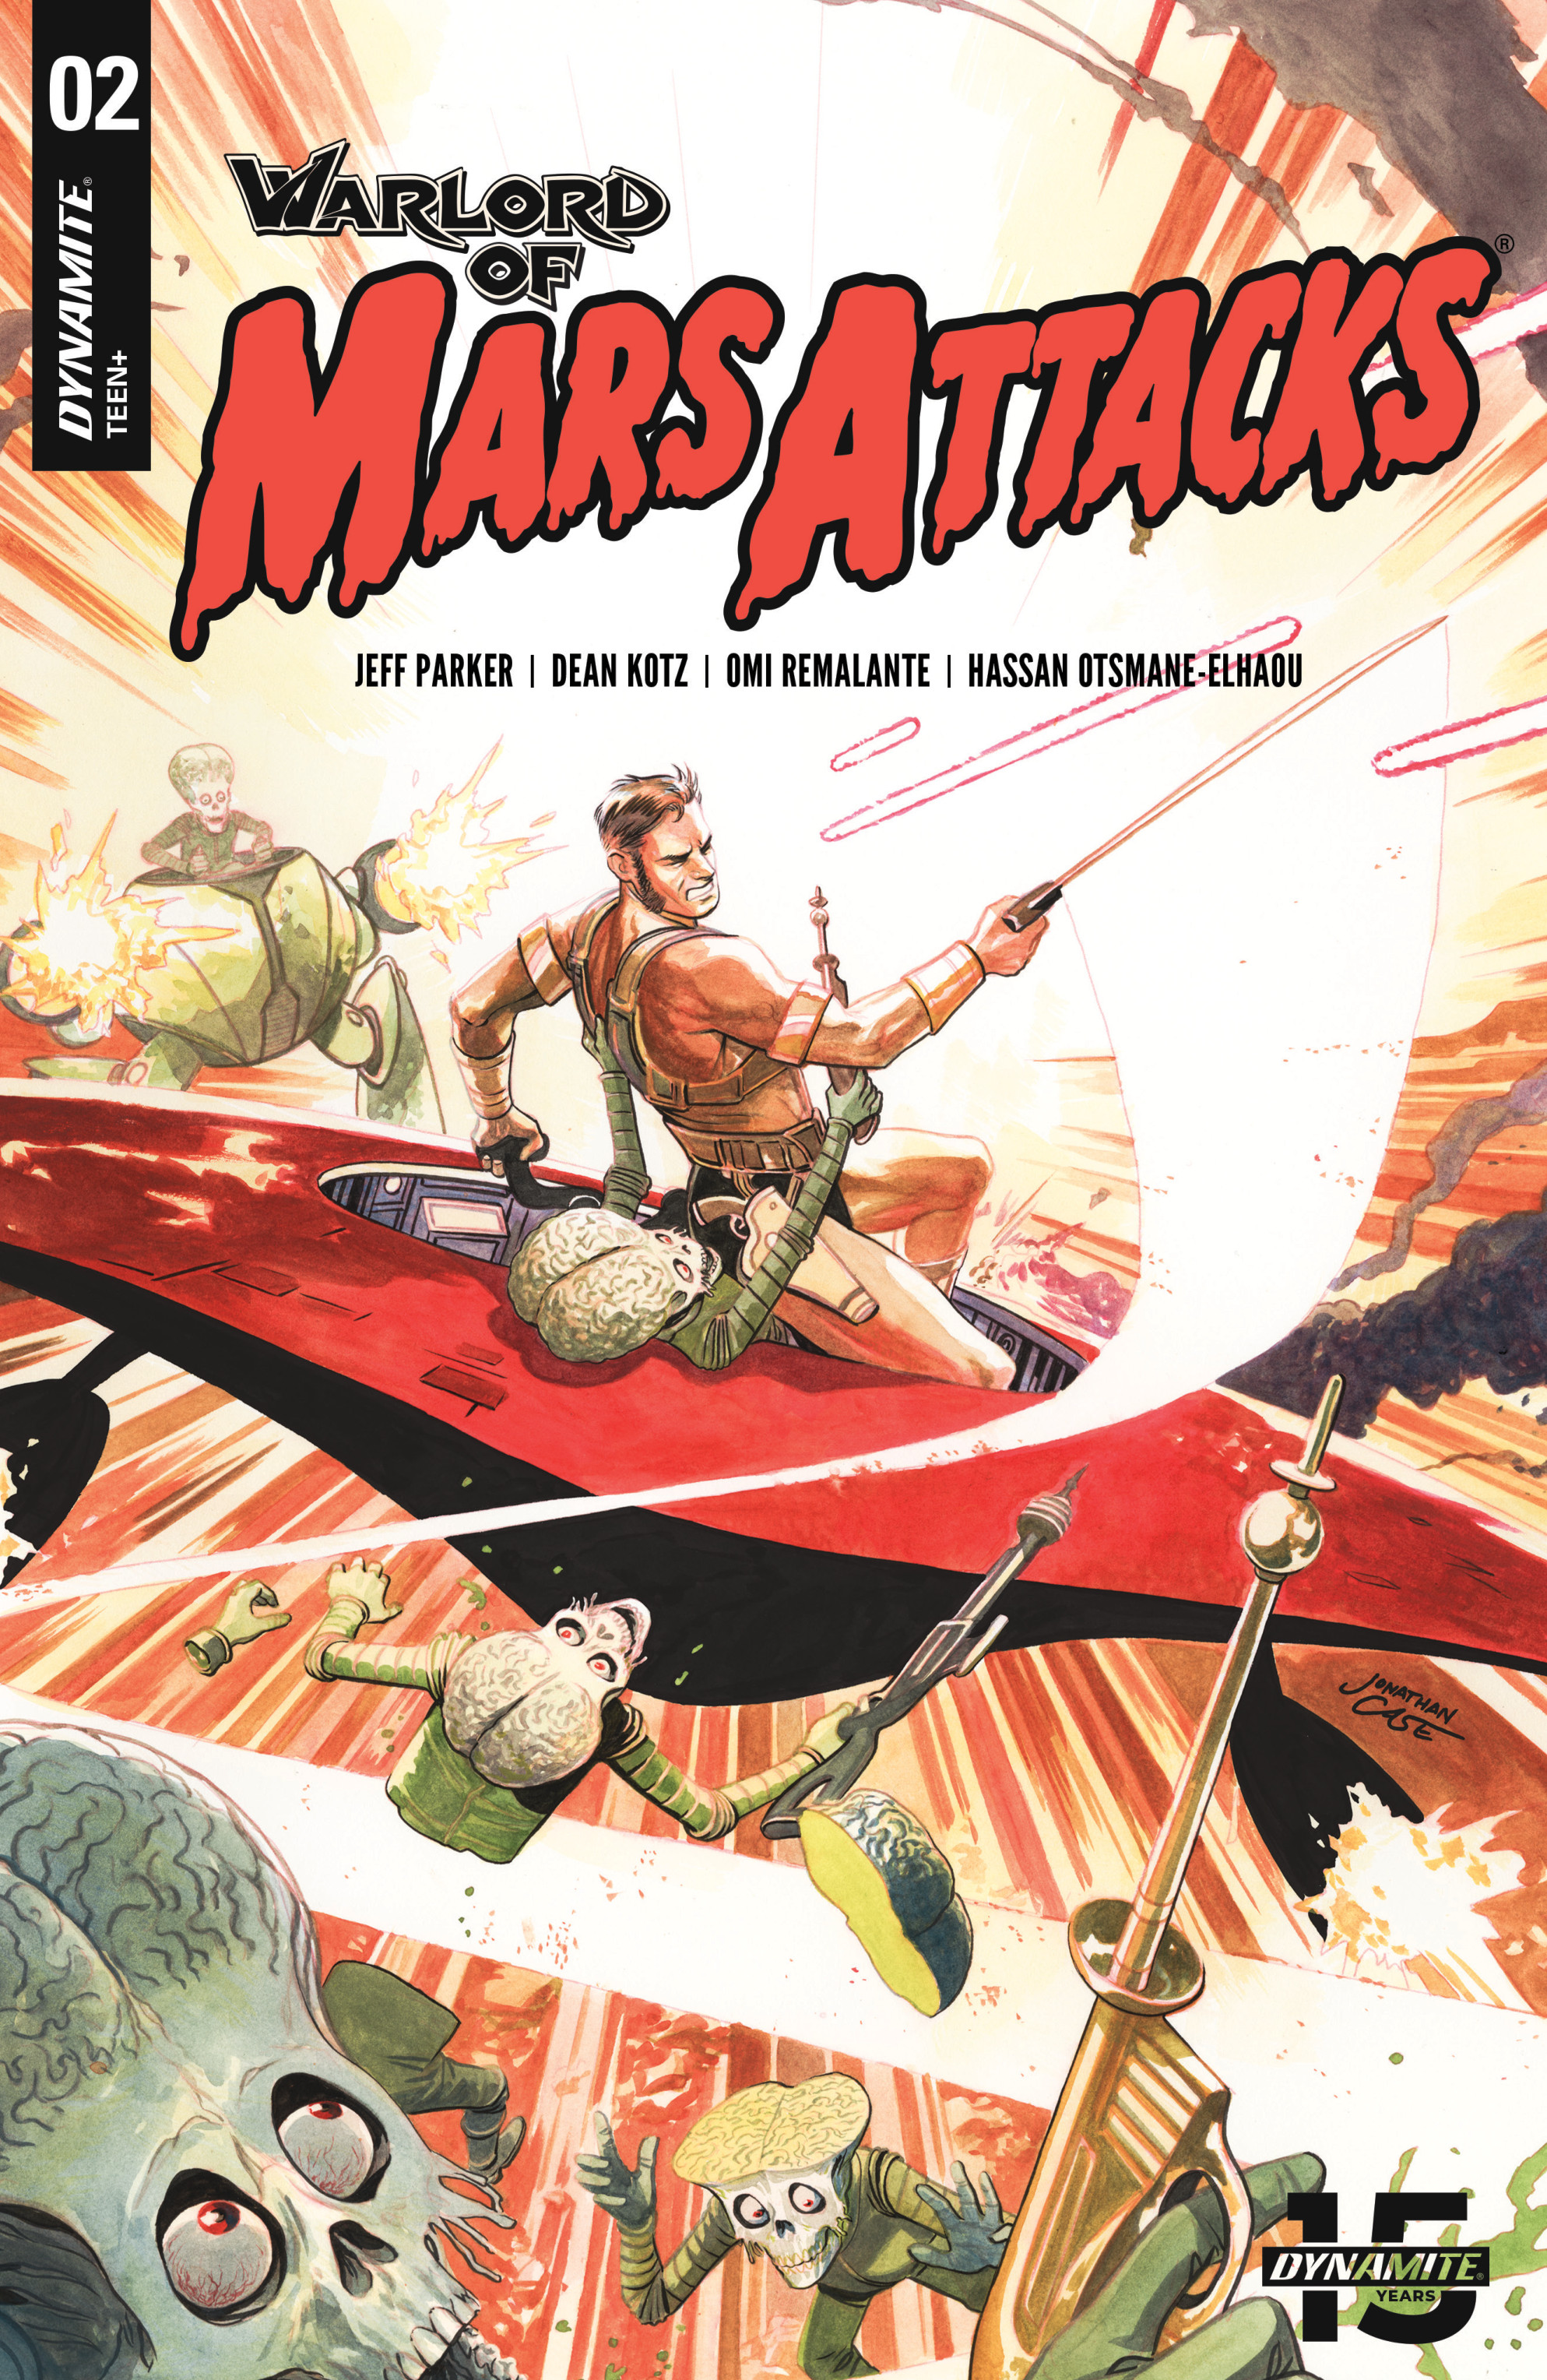 Warlord of Mars Attacks (2019-): Chapter 2 - Page 2